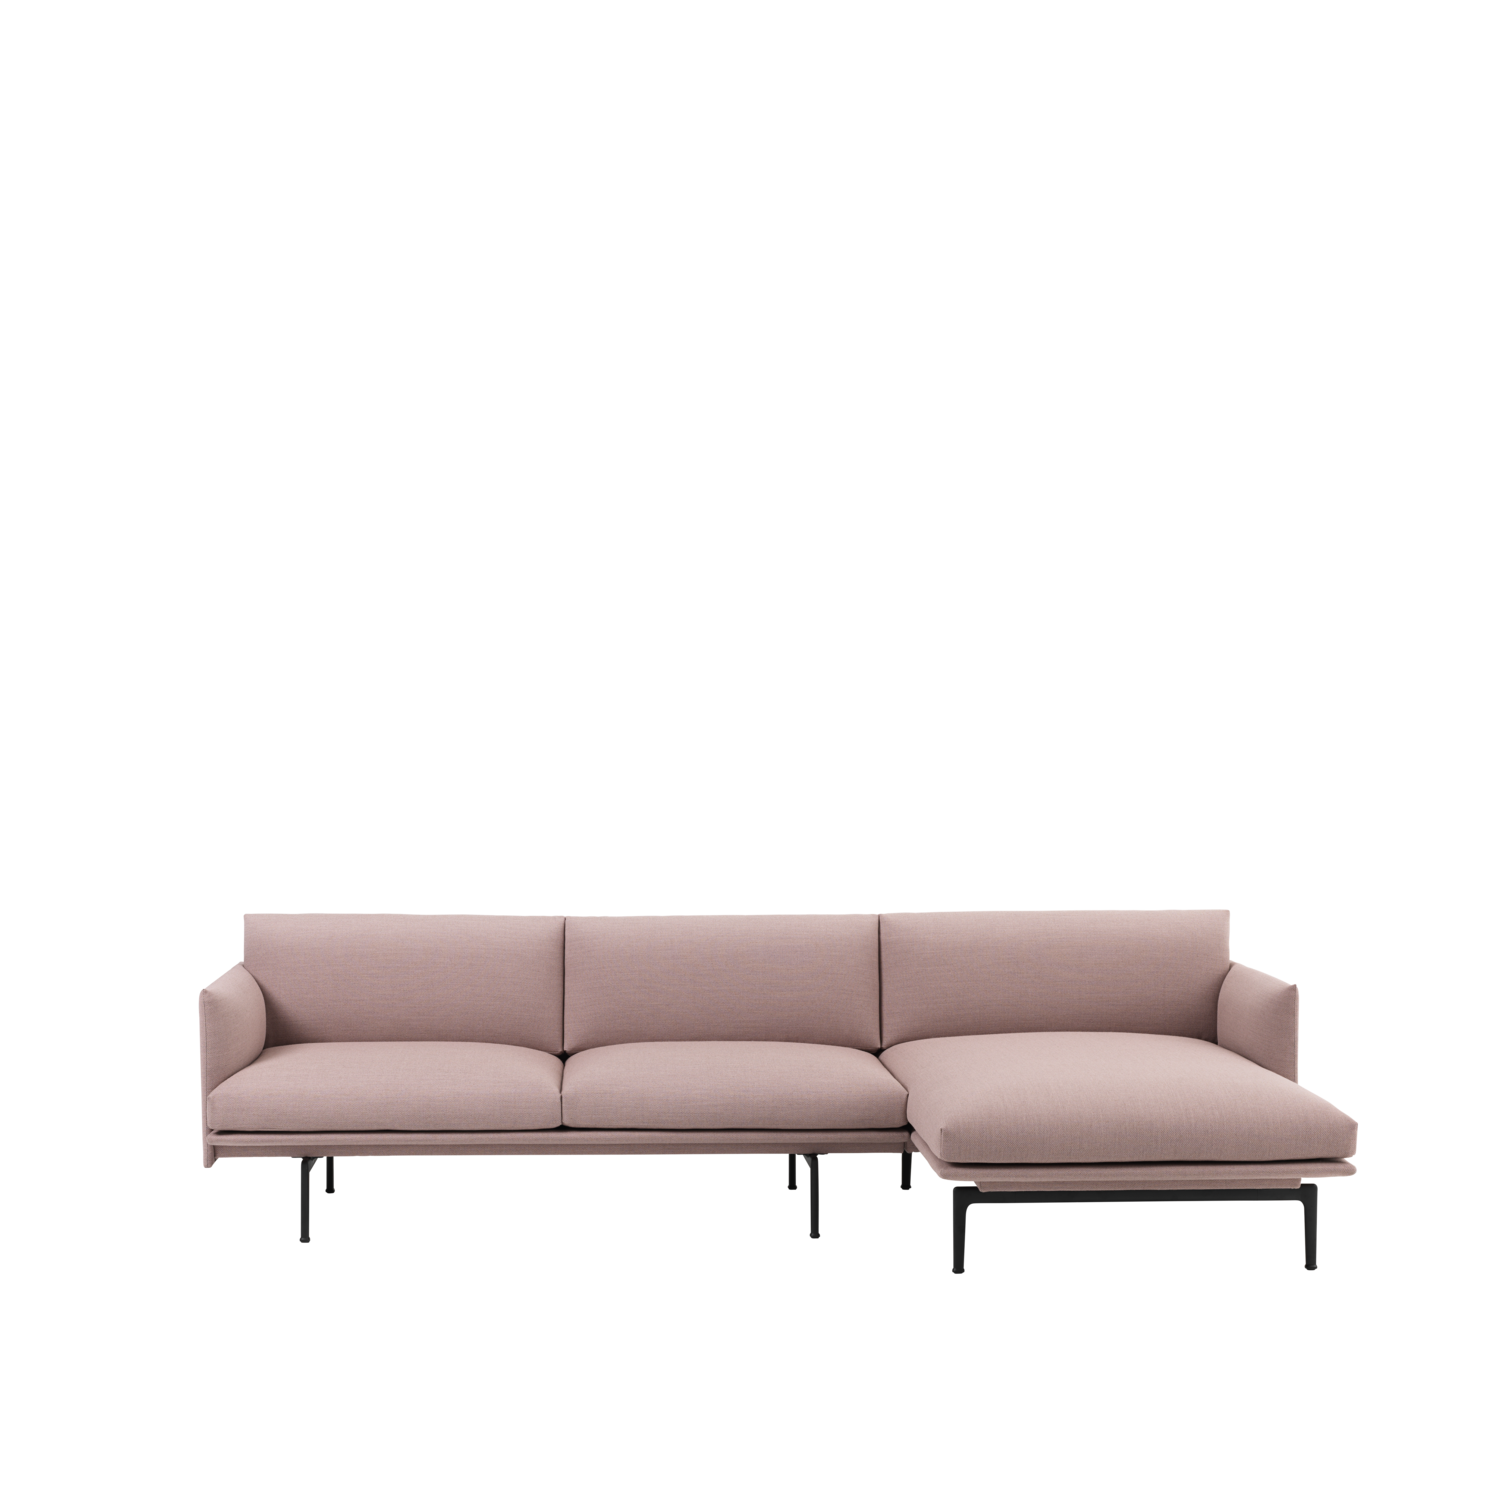 Outline Sofa Chaise Longue | Extensive comfort in an elegant design